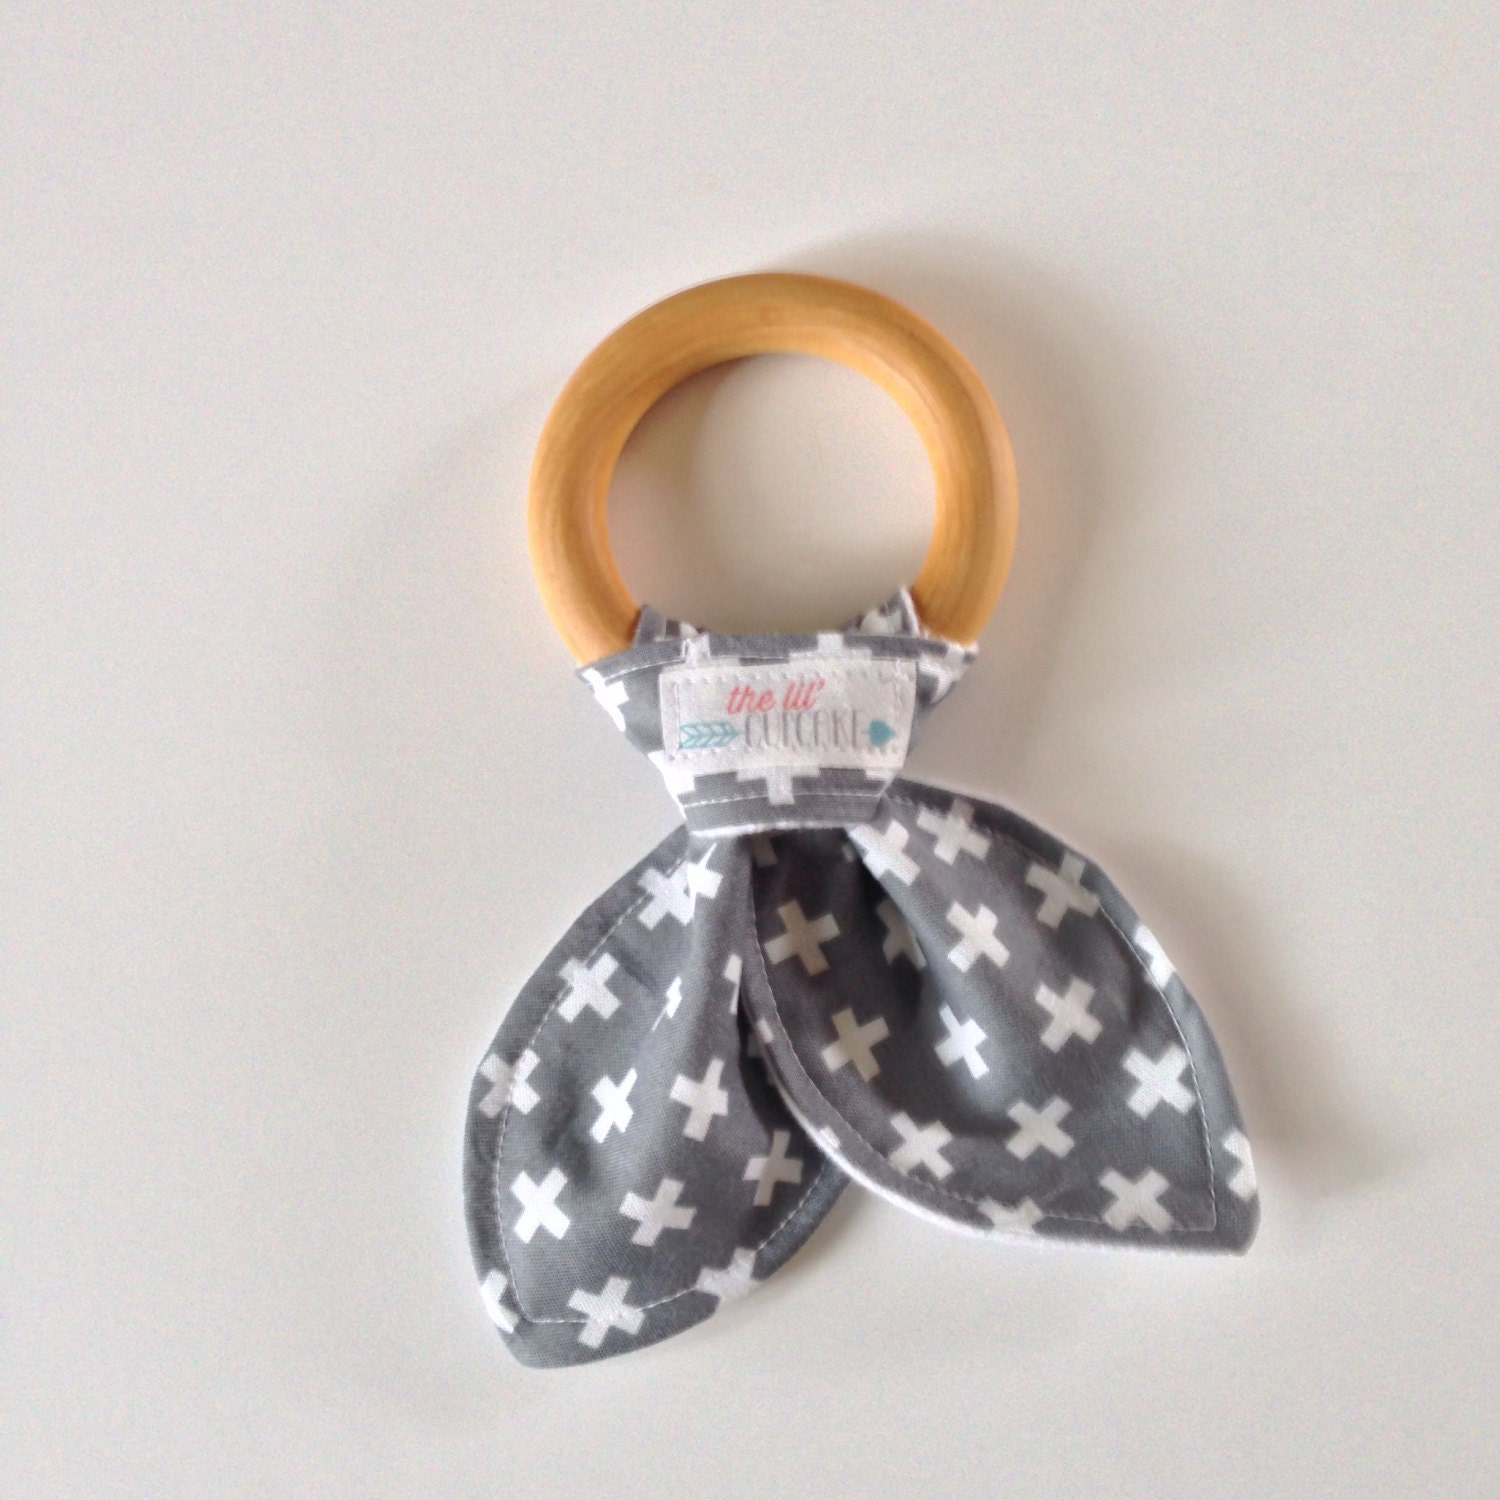 Teething Ring || Natural Organic Wooden Teething ring with removable bunny ears || GREY & WHITE CROSSES